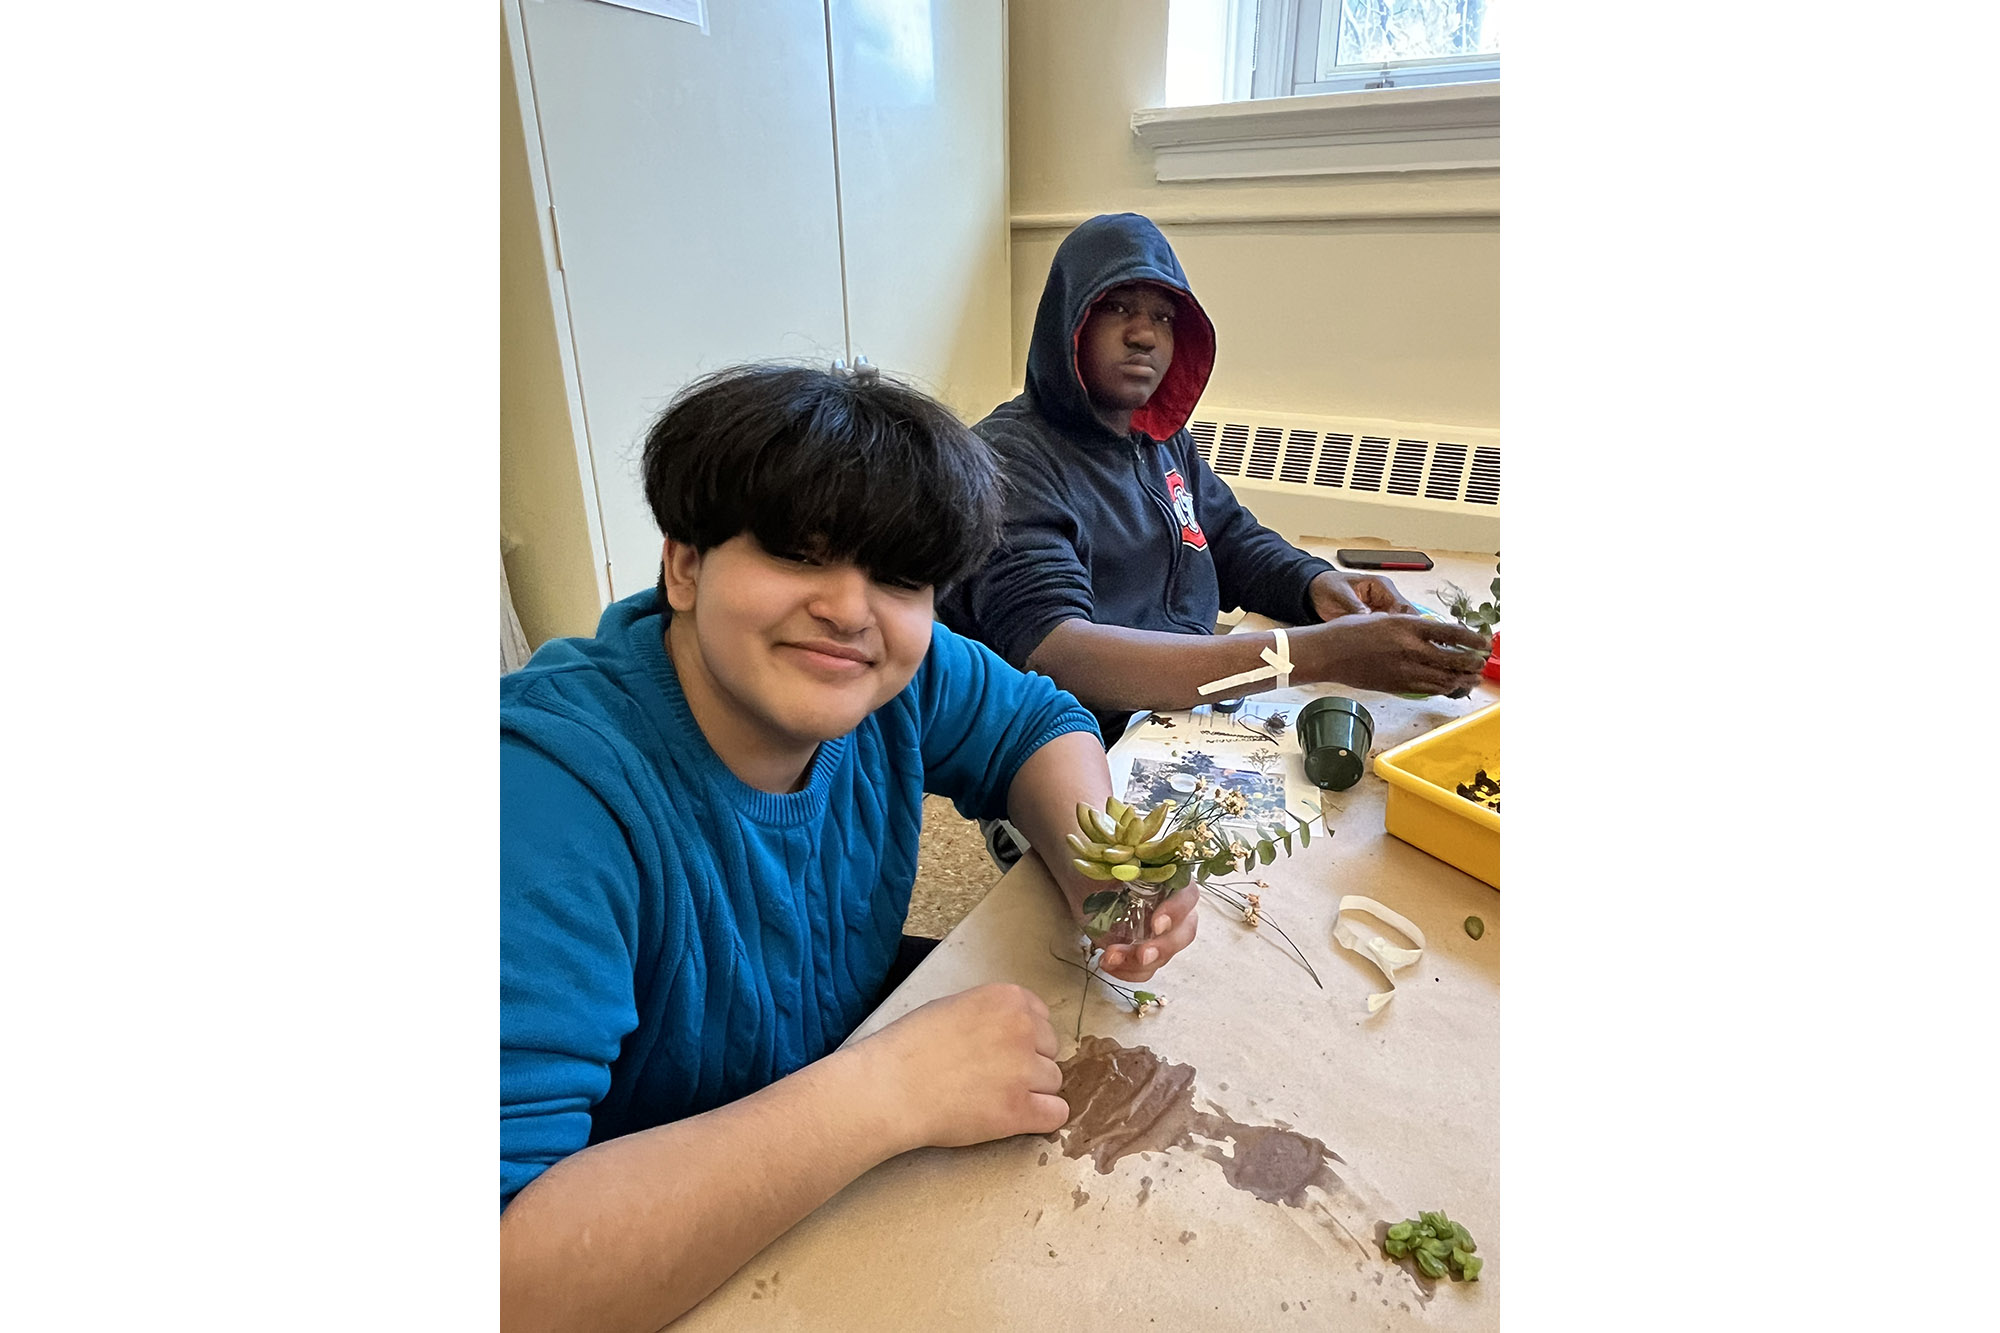 Two students create wearable art with live plants in a classroom setting